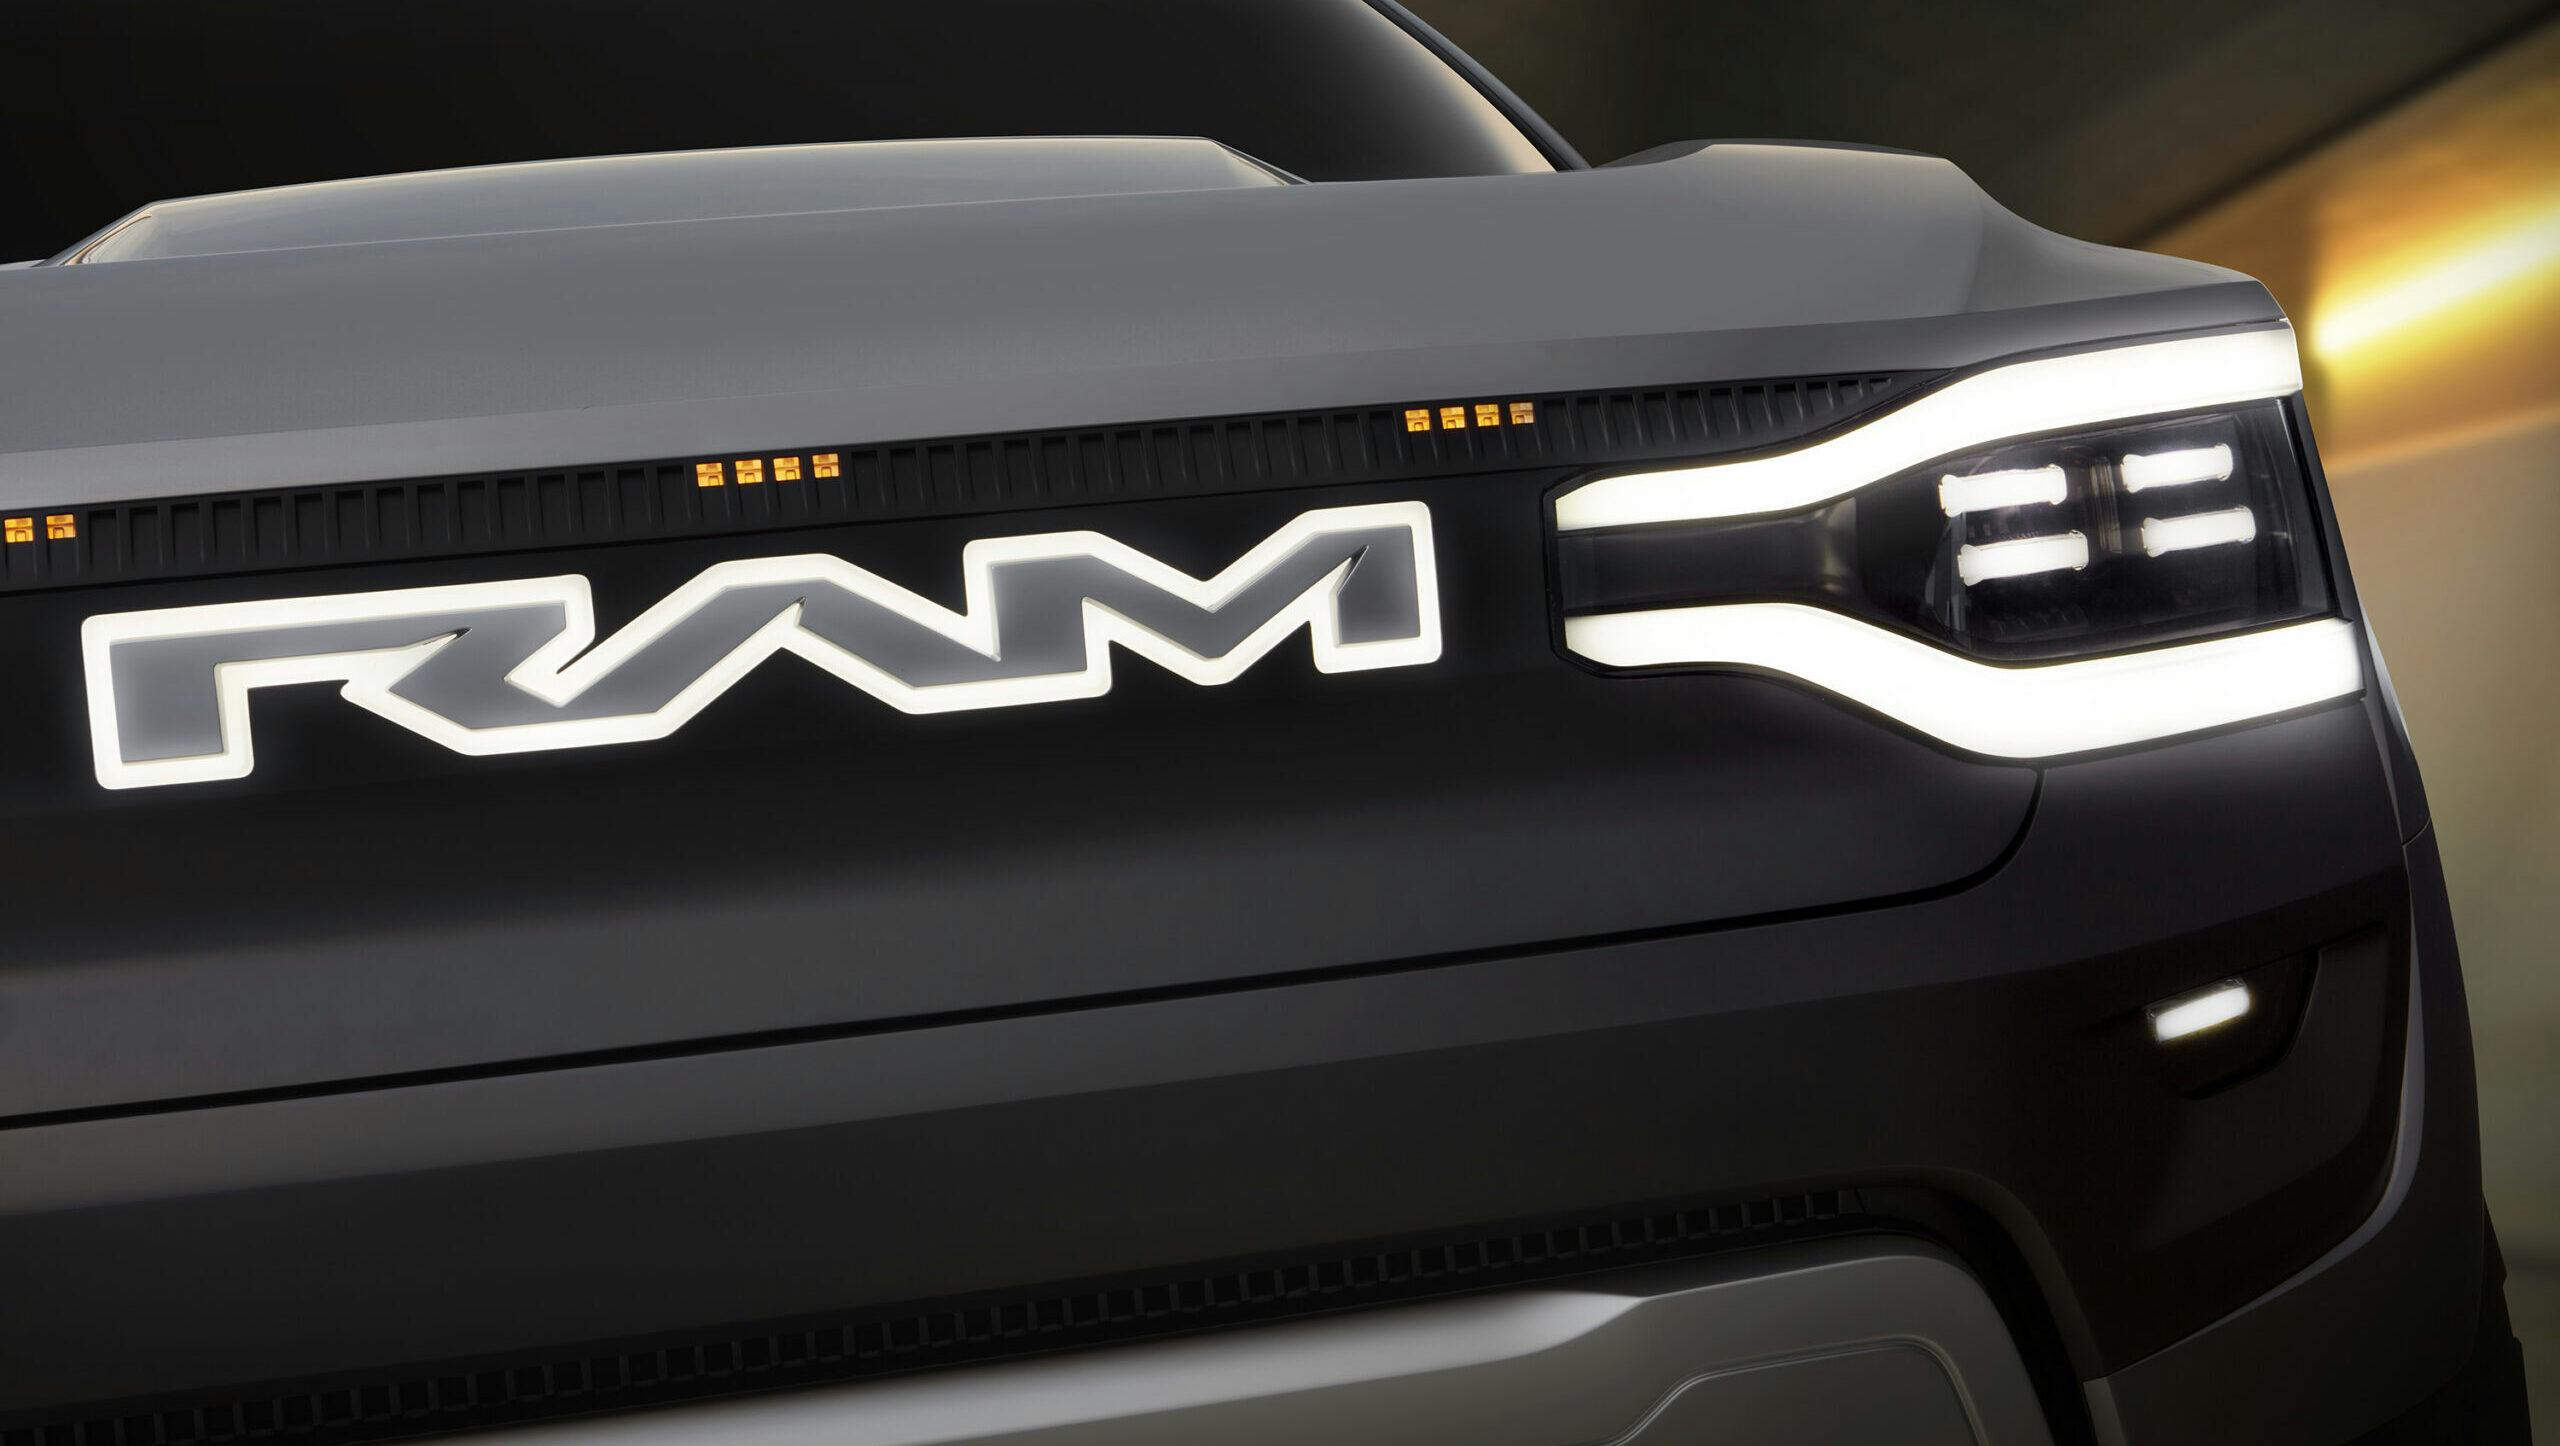 Ram 1500 Revolution Battery-electric Vehicle BEV Concept grille, badging and tuning fork headlight